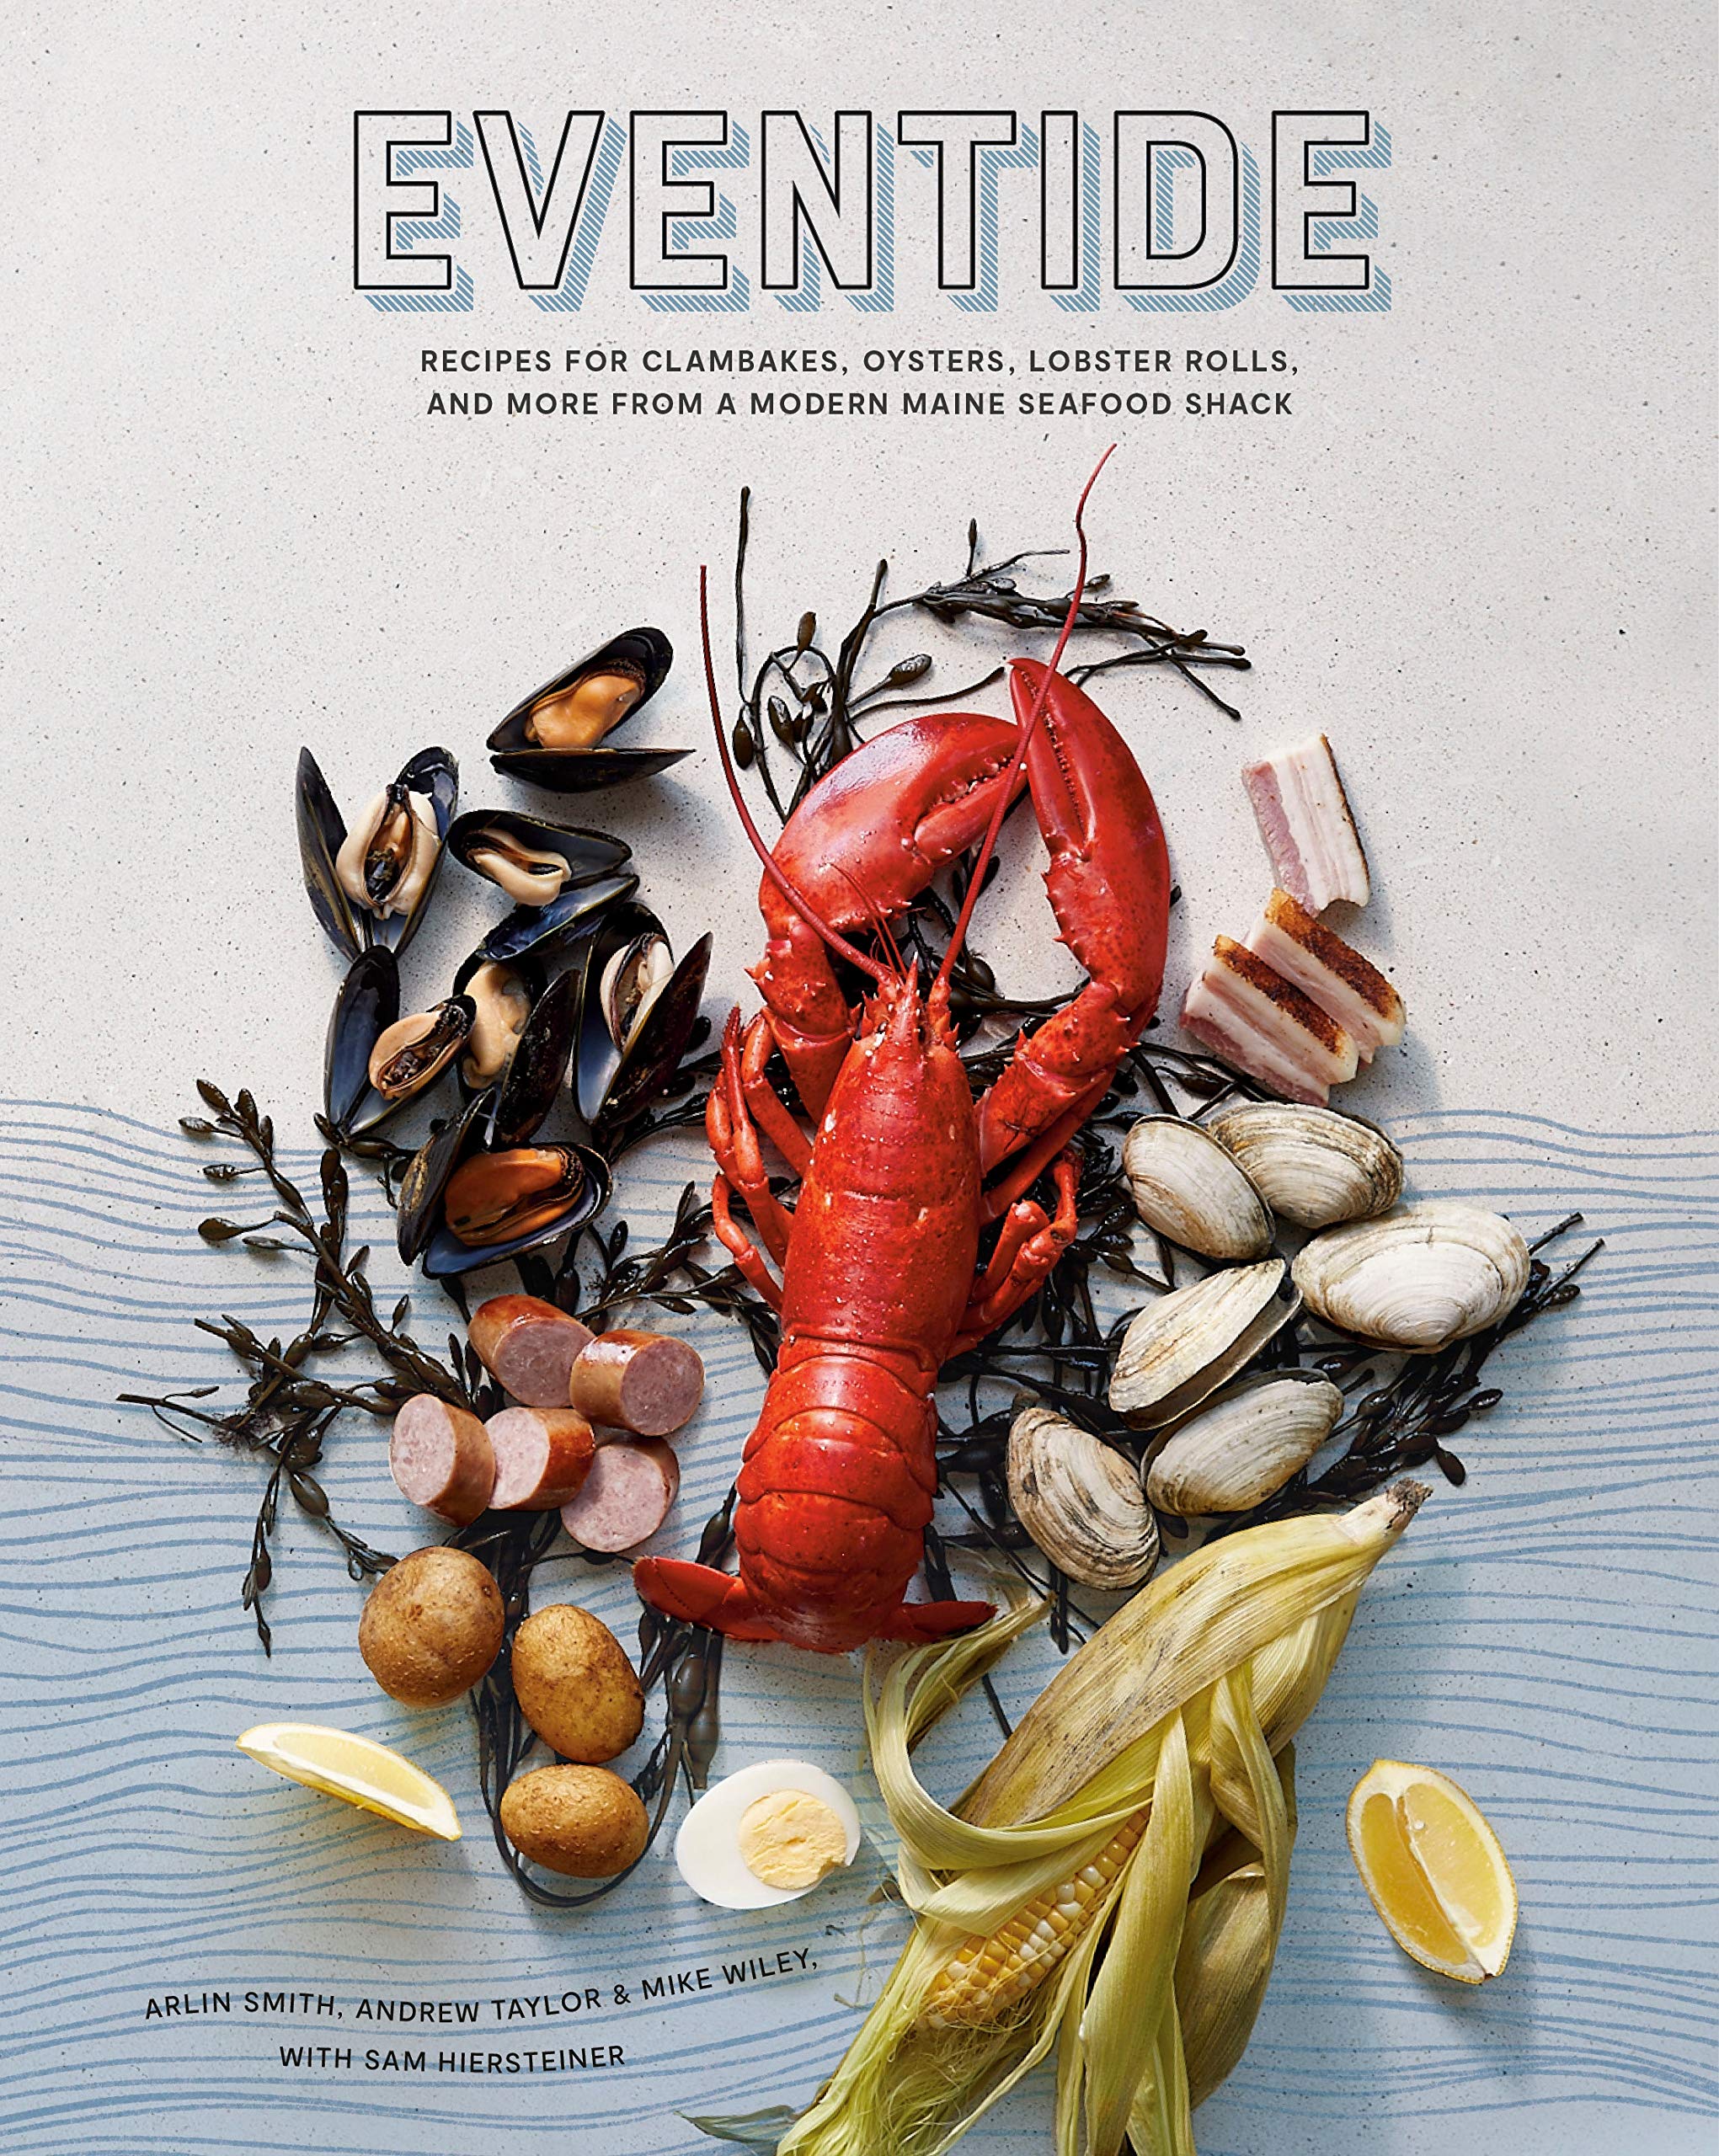 Eventide: Recipes for Clambakes, Oysters, Lobster Rolls, and More from a Modern Maine Seafood Shack (Arlin Smith, Andrew Taylor, Mike Wiley, Sam Hiersteiner)